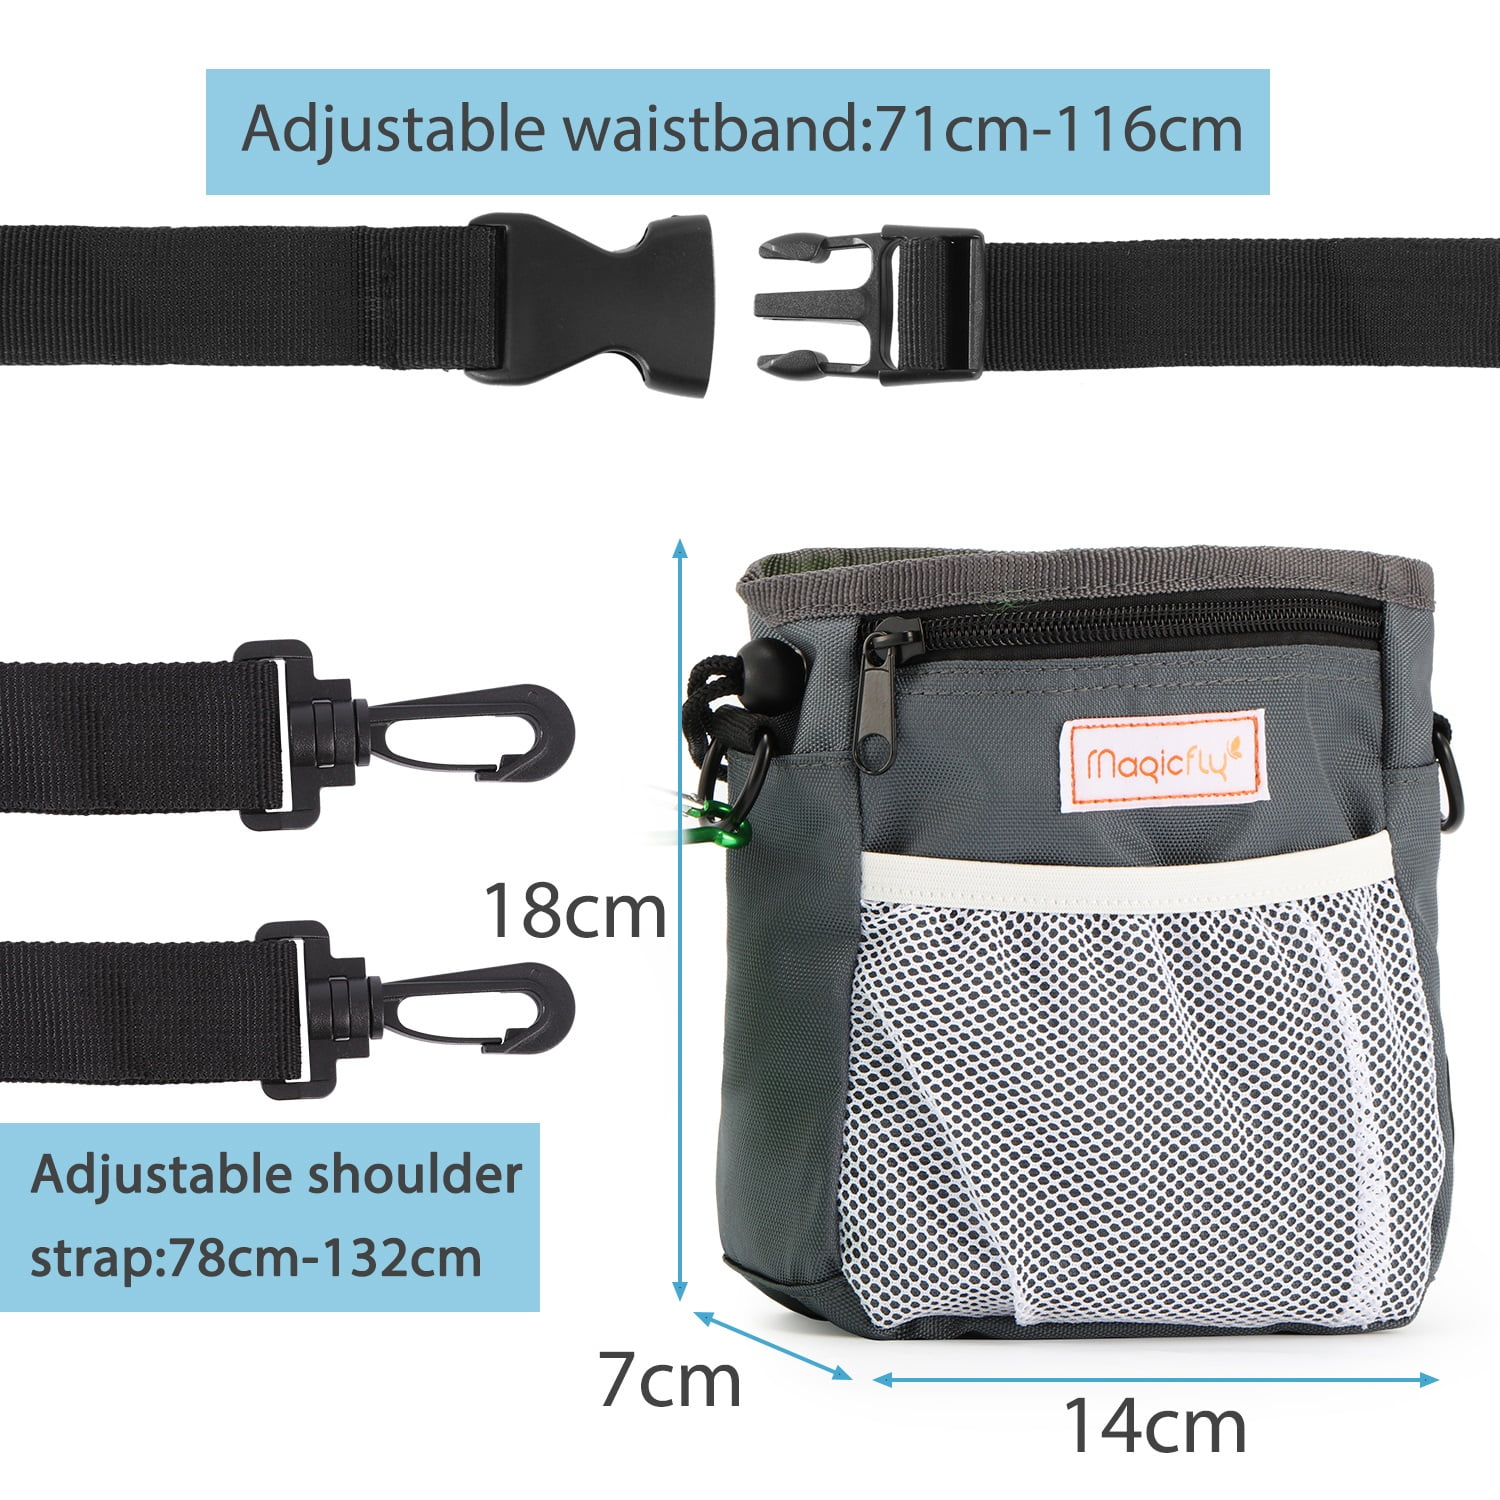 Gray YATG Dog Treat Pouch,Dog Training Pouch with Waterproof Built-in Dog Training Clicker,Adjustable Waist Strap,Dog Training Whistle and Poop Bag for Pet Puppy Doggie Training Walking and More